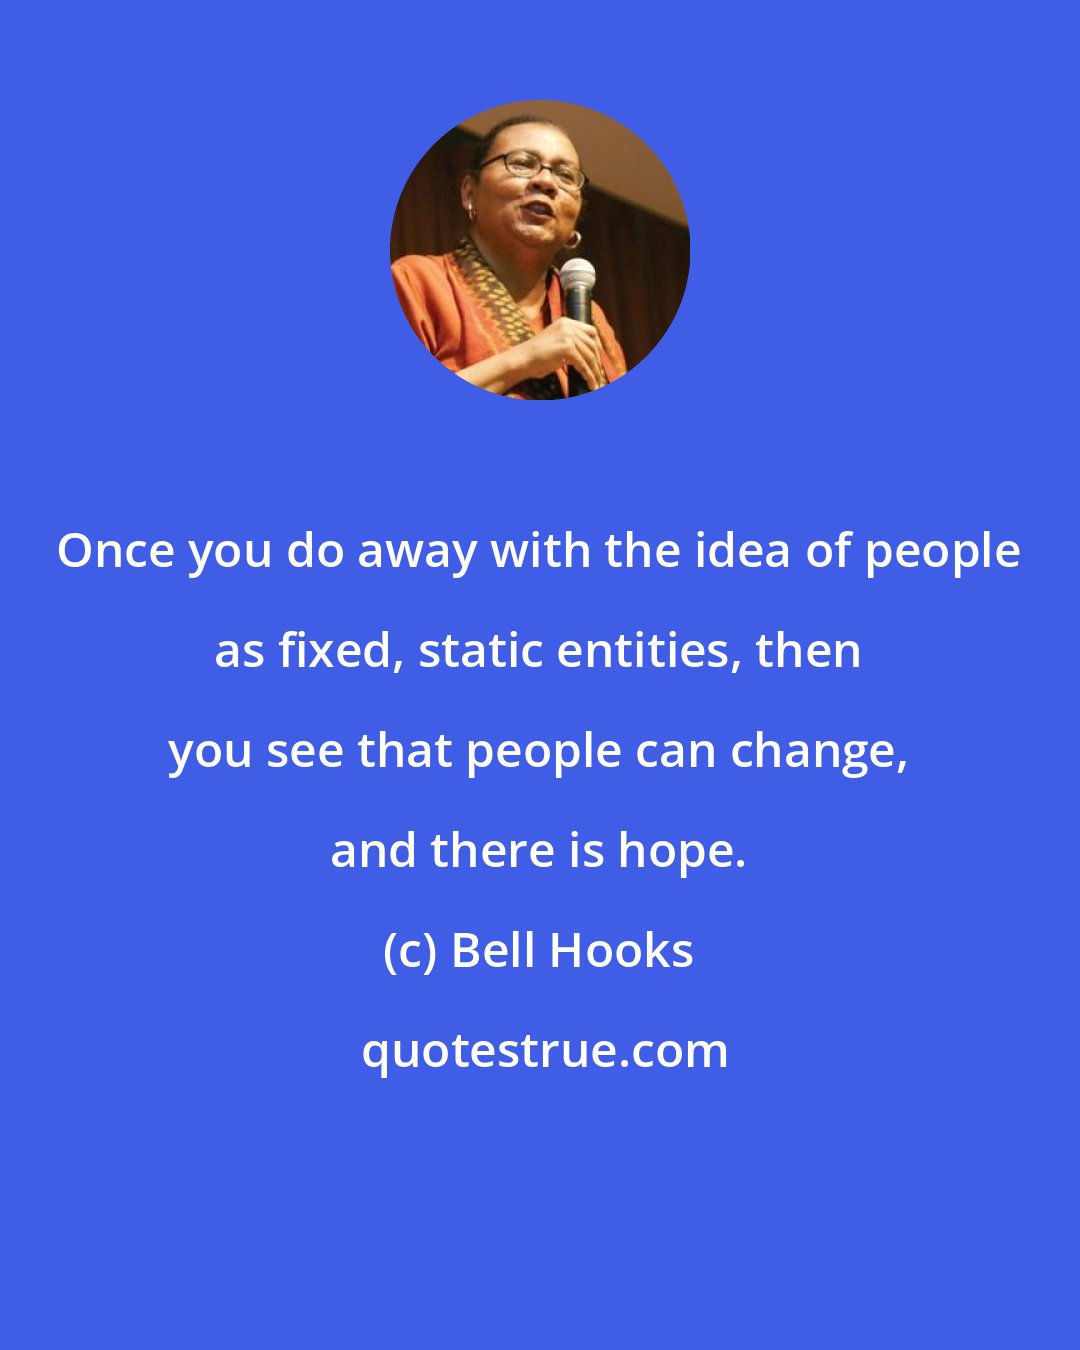 Bell Hooks: Once you do away with the idea of people as fixed, static entities, then you see that people can change, and there is hope.